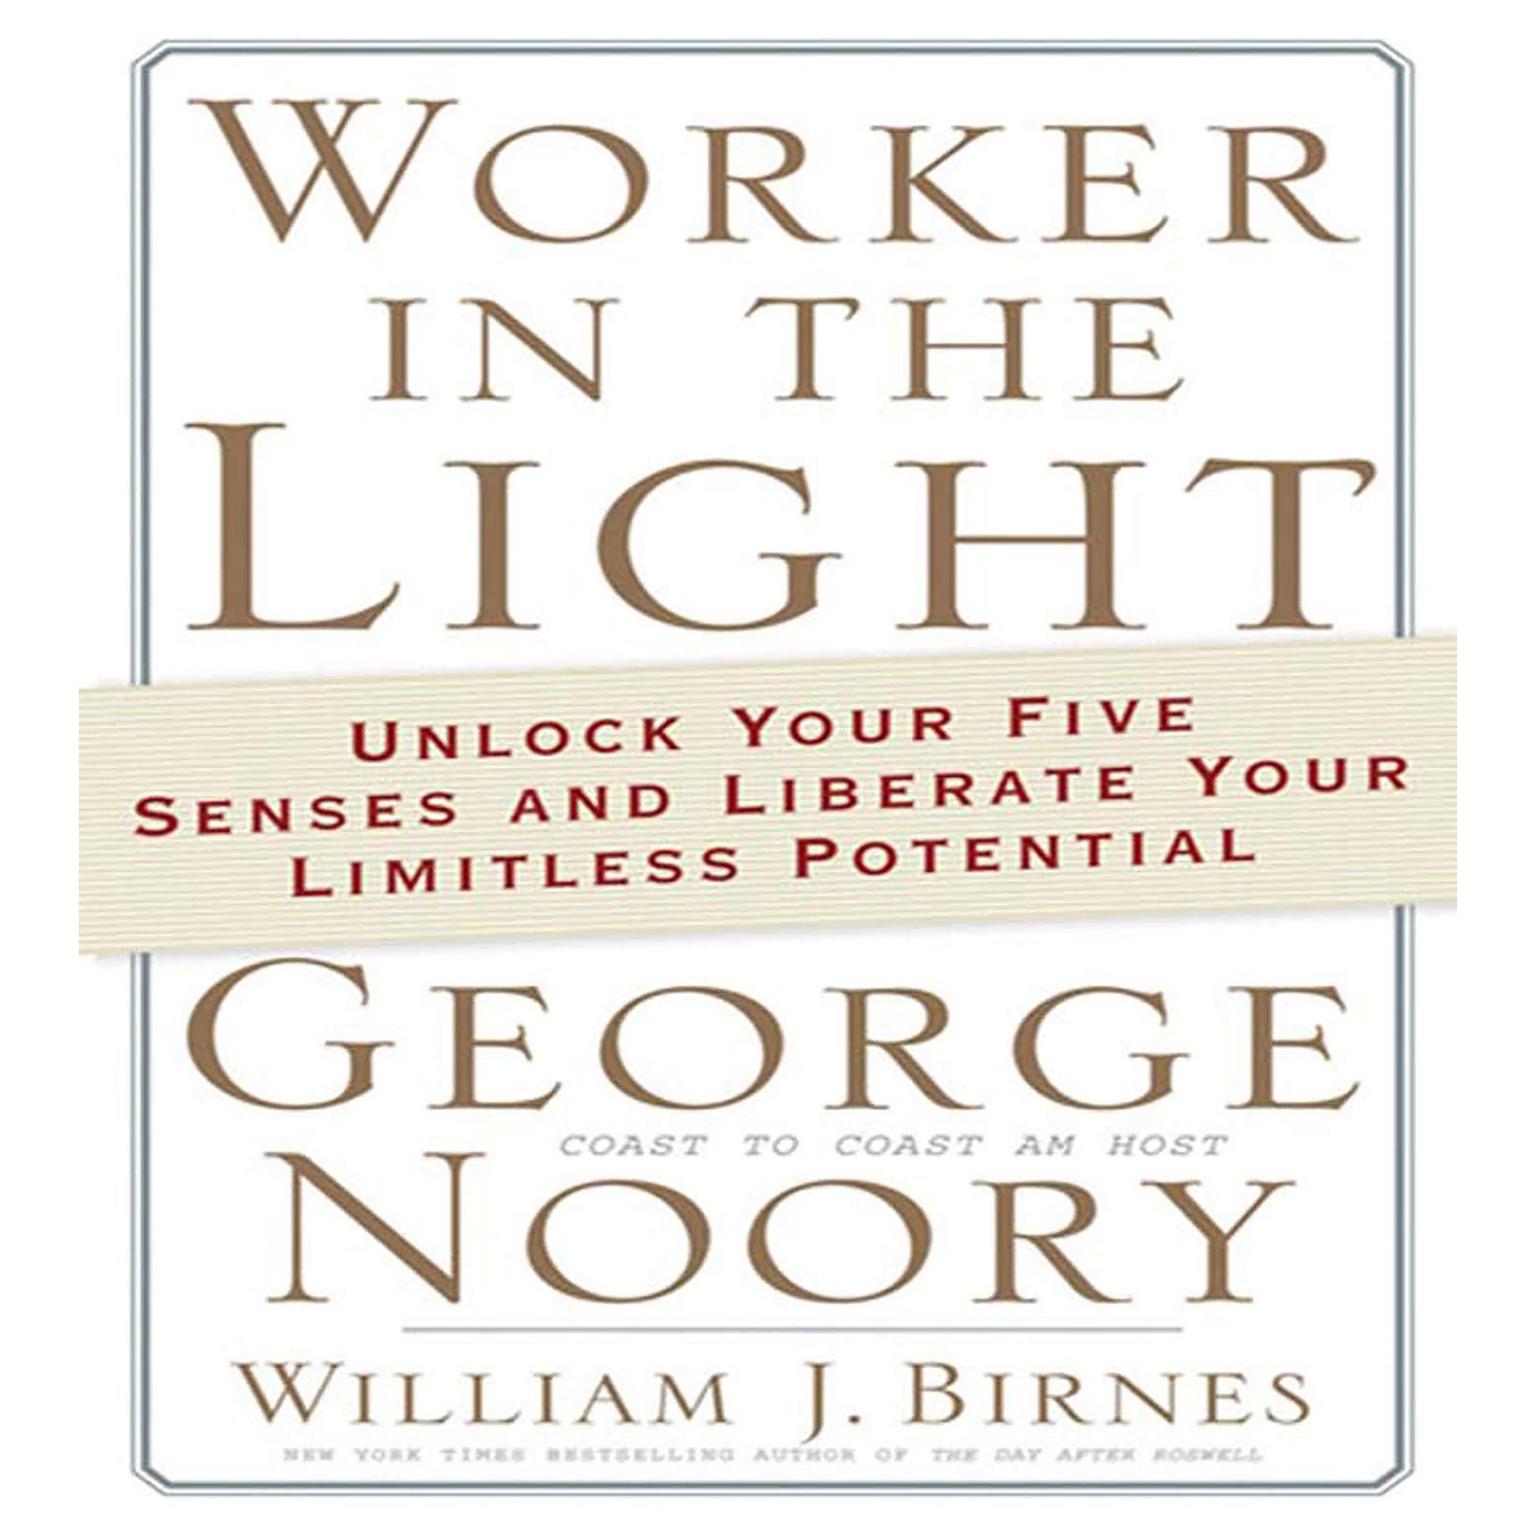 Worker in the Light (Abridged): Unlock Your Five Senses and Liberate Your Limitless Potential Audiobook, by George Noory